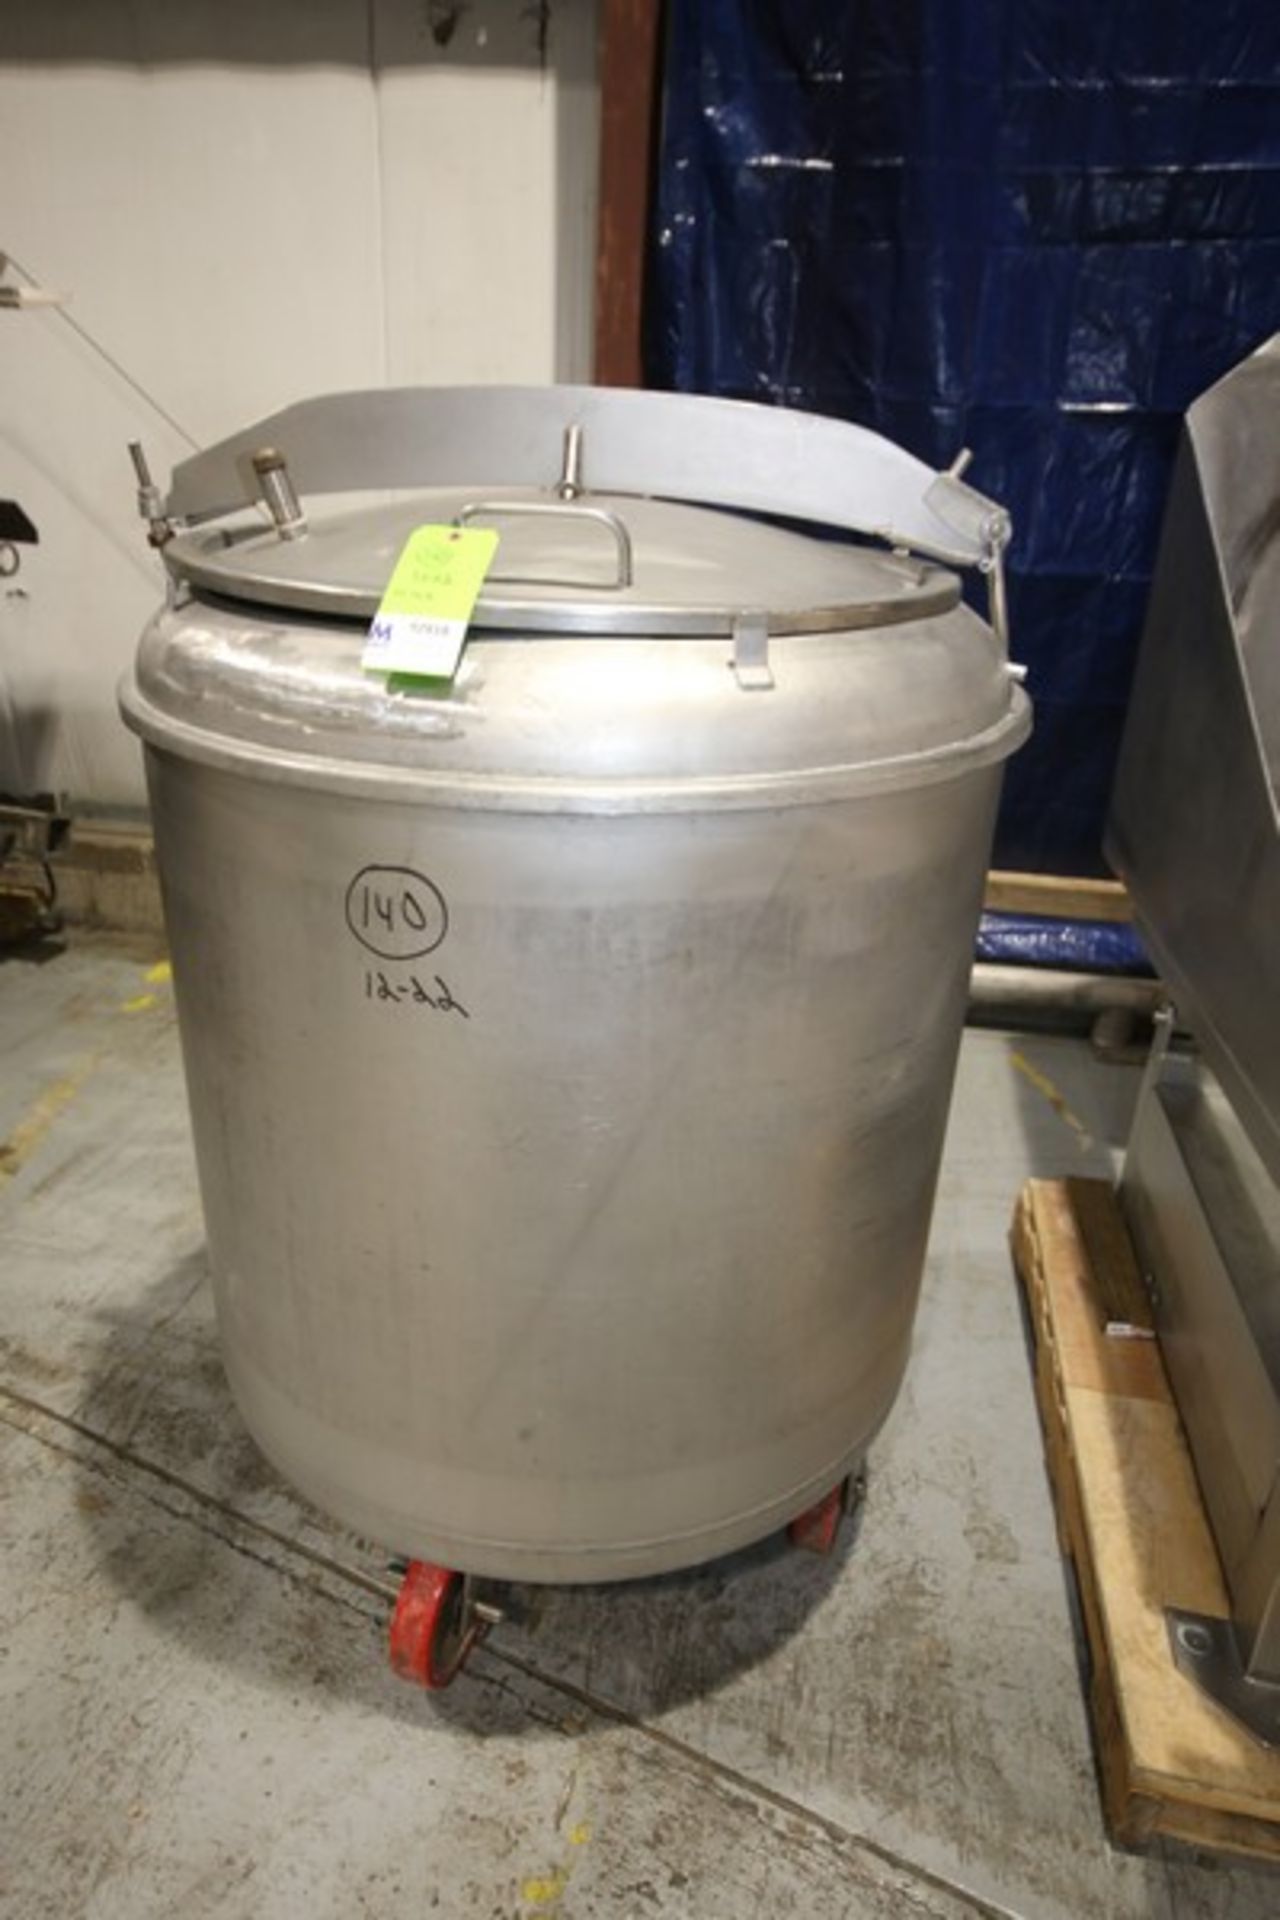 Aprox. 39" W x 46" H Portable S/S Tanks, with Welded Inside Baffles & Lid (INV #92820) (Located @